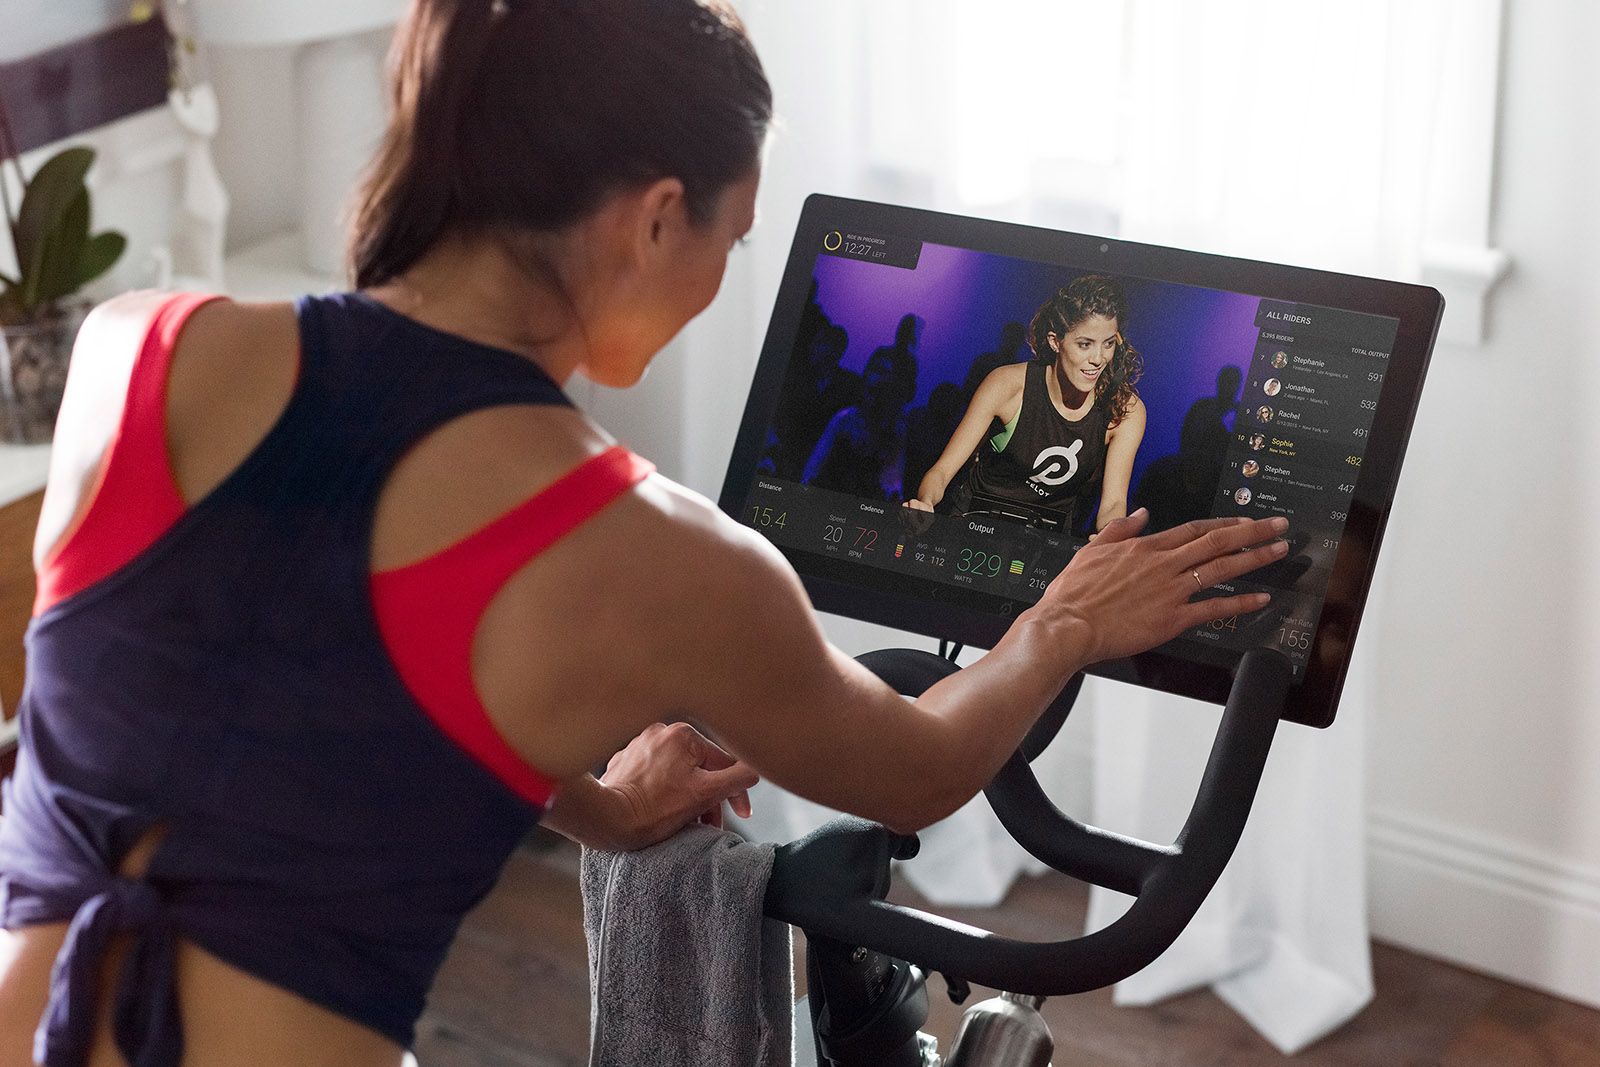 Peloton smart exercise bike coming to the UK huge screen and live workout classes to follow at home image 2